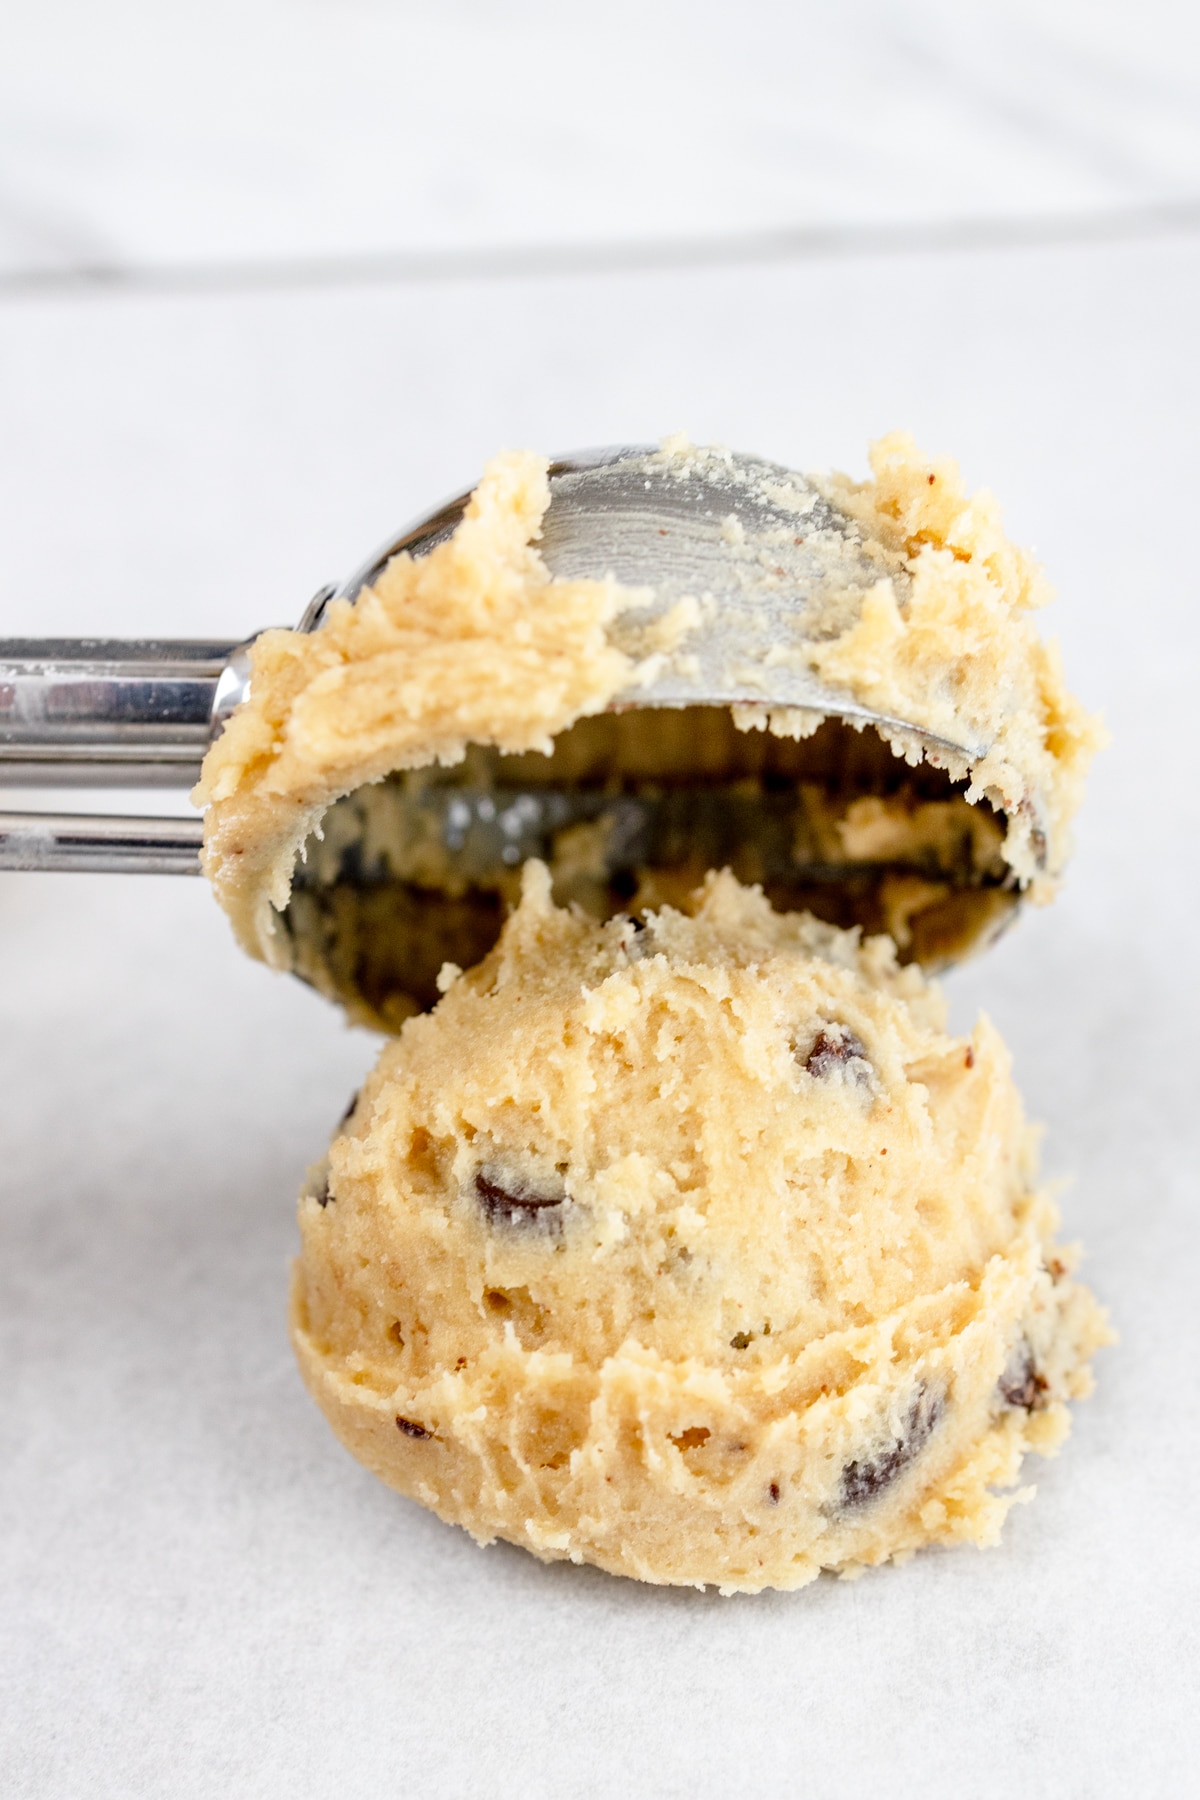 Chocolate Chip Cookie Dough from Cookie scoop